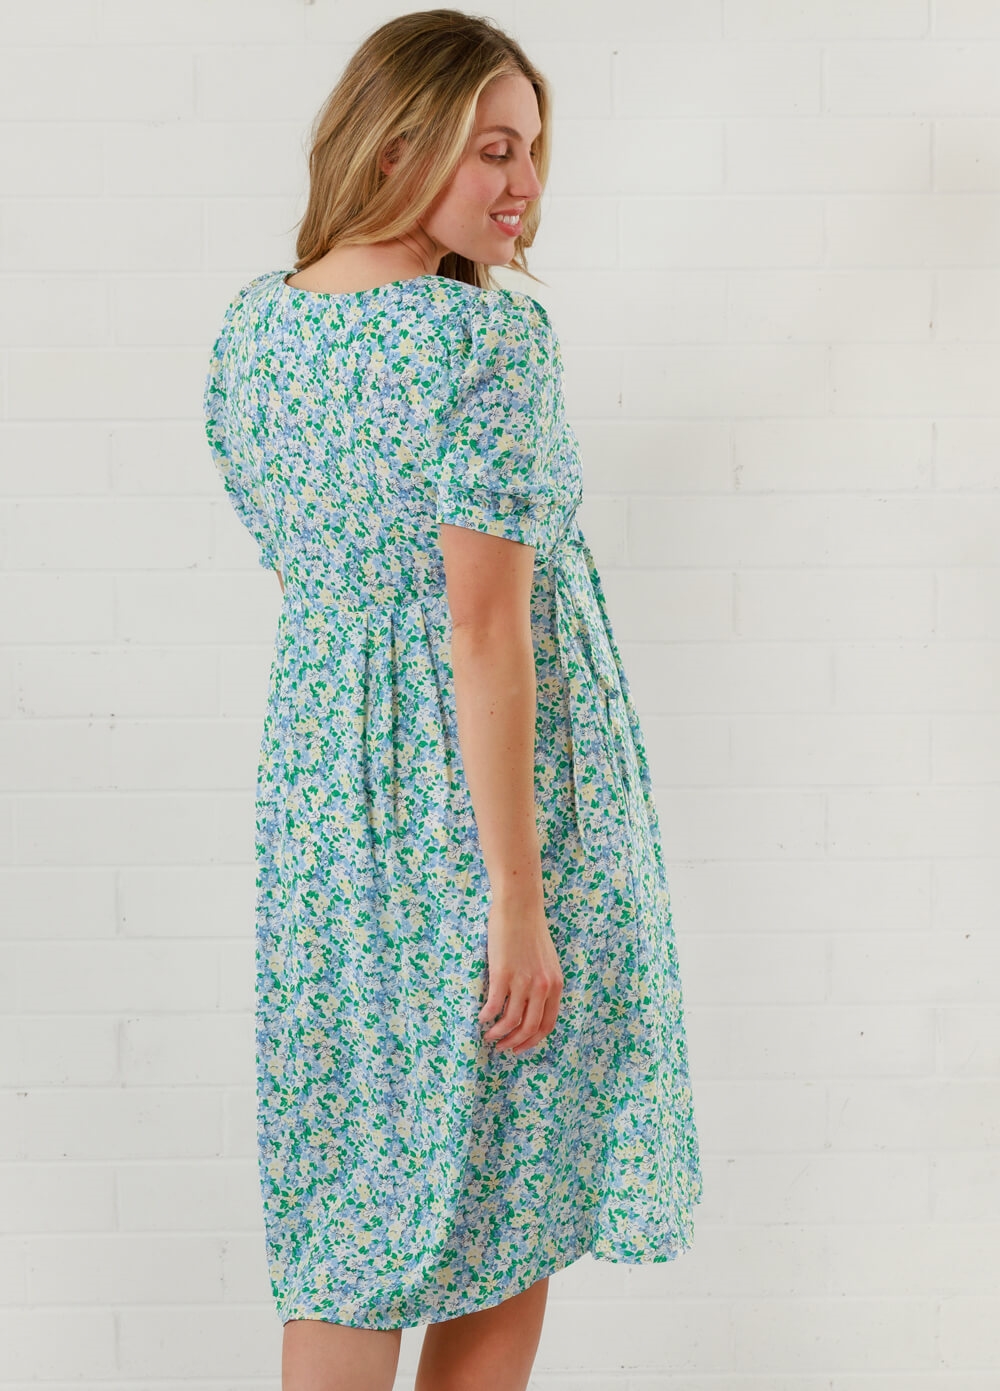 Lait & Co - Lea-Claire Maternity Dress in Green Floral